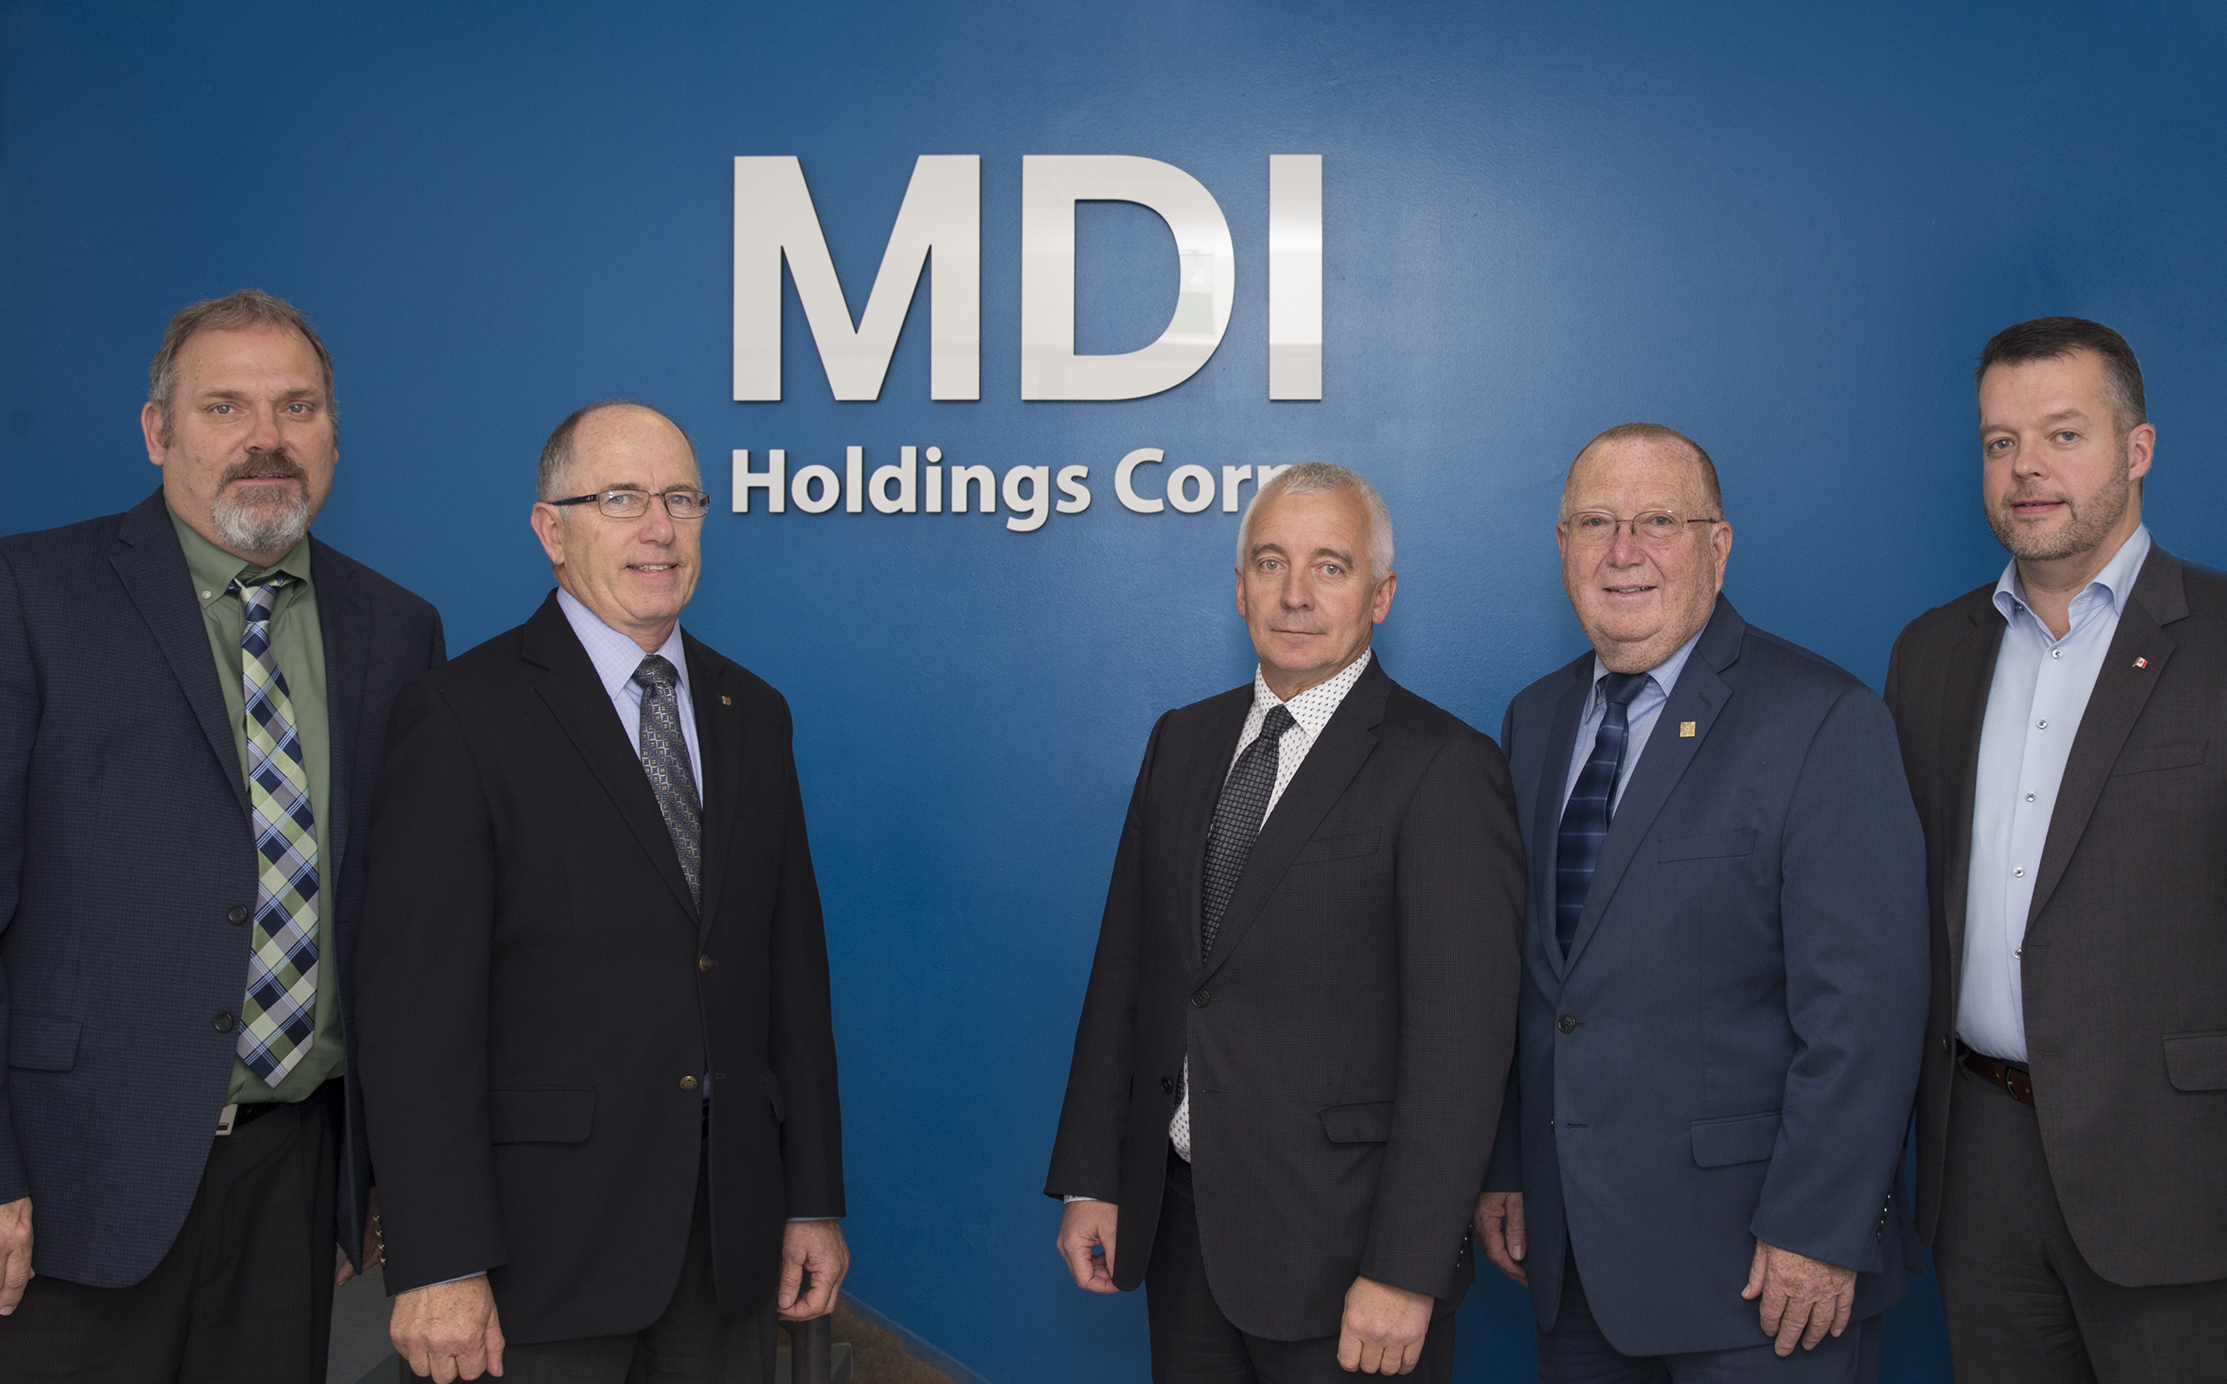 MDI Grand Opening - Official Photo